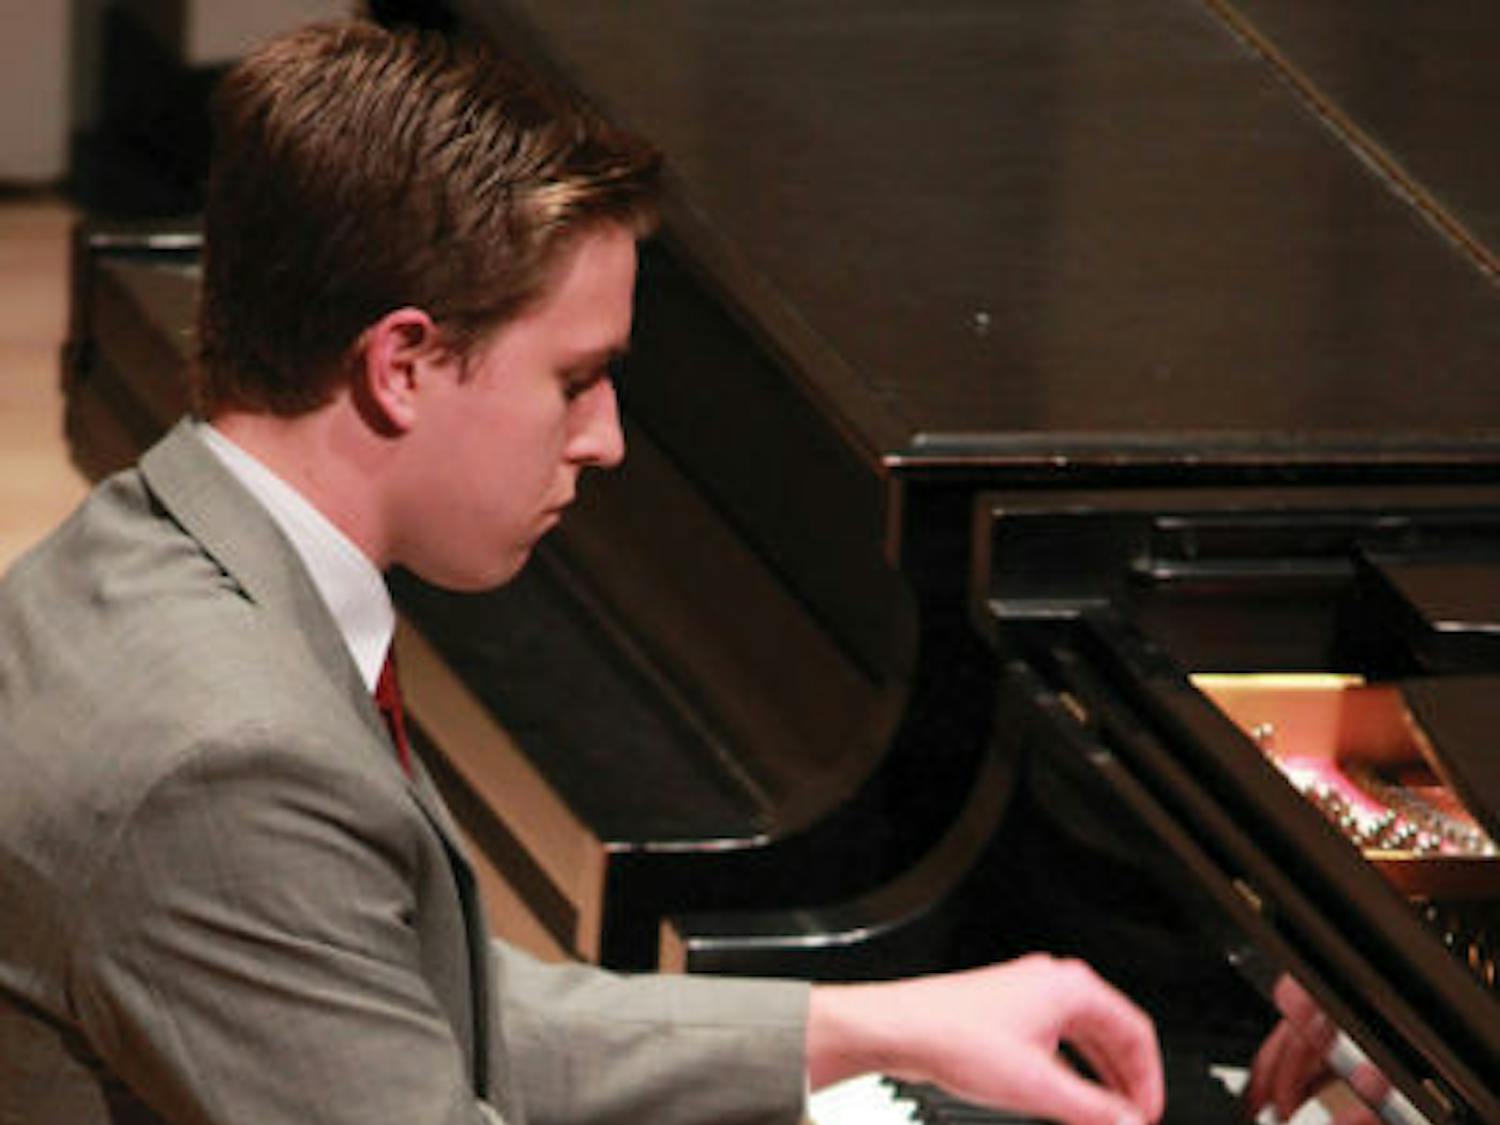 Southern Oregon University student Nic Temple, 19, performs “Transcendental” Etude No. 7, “Eroica” at the 2013 UF International Piano Festival on Monday.
&nbsp;